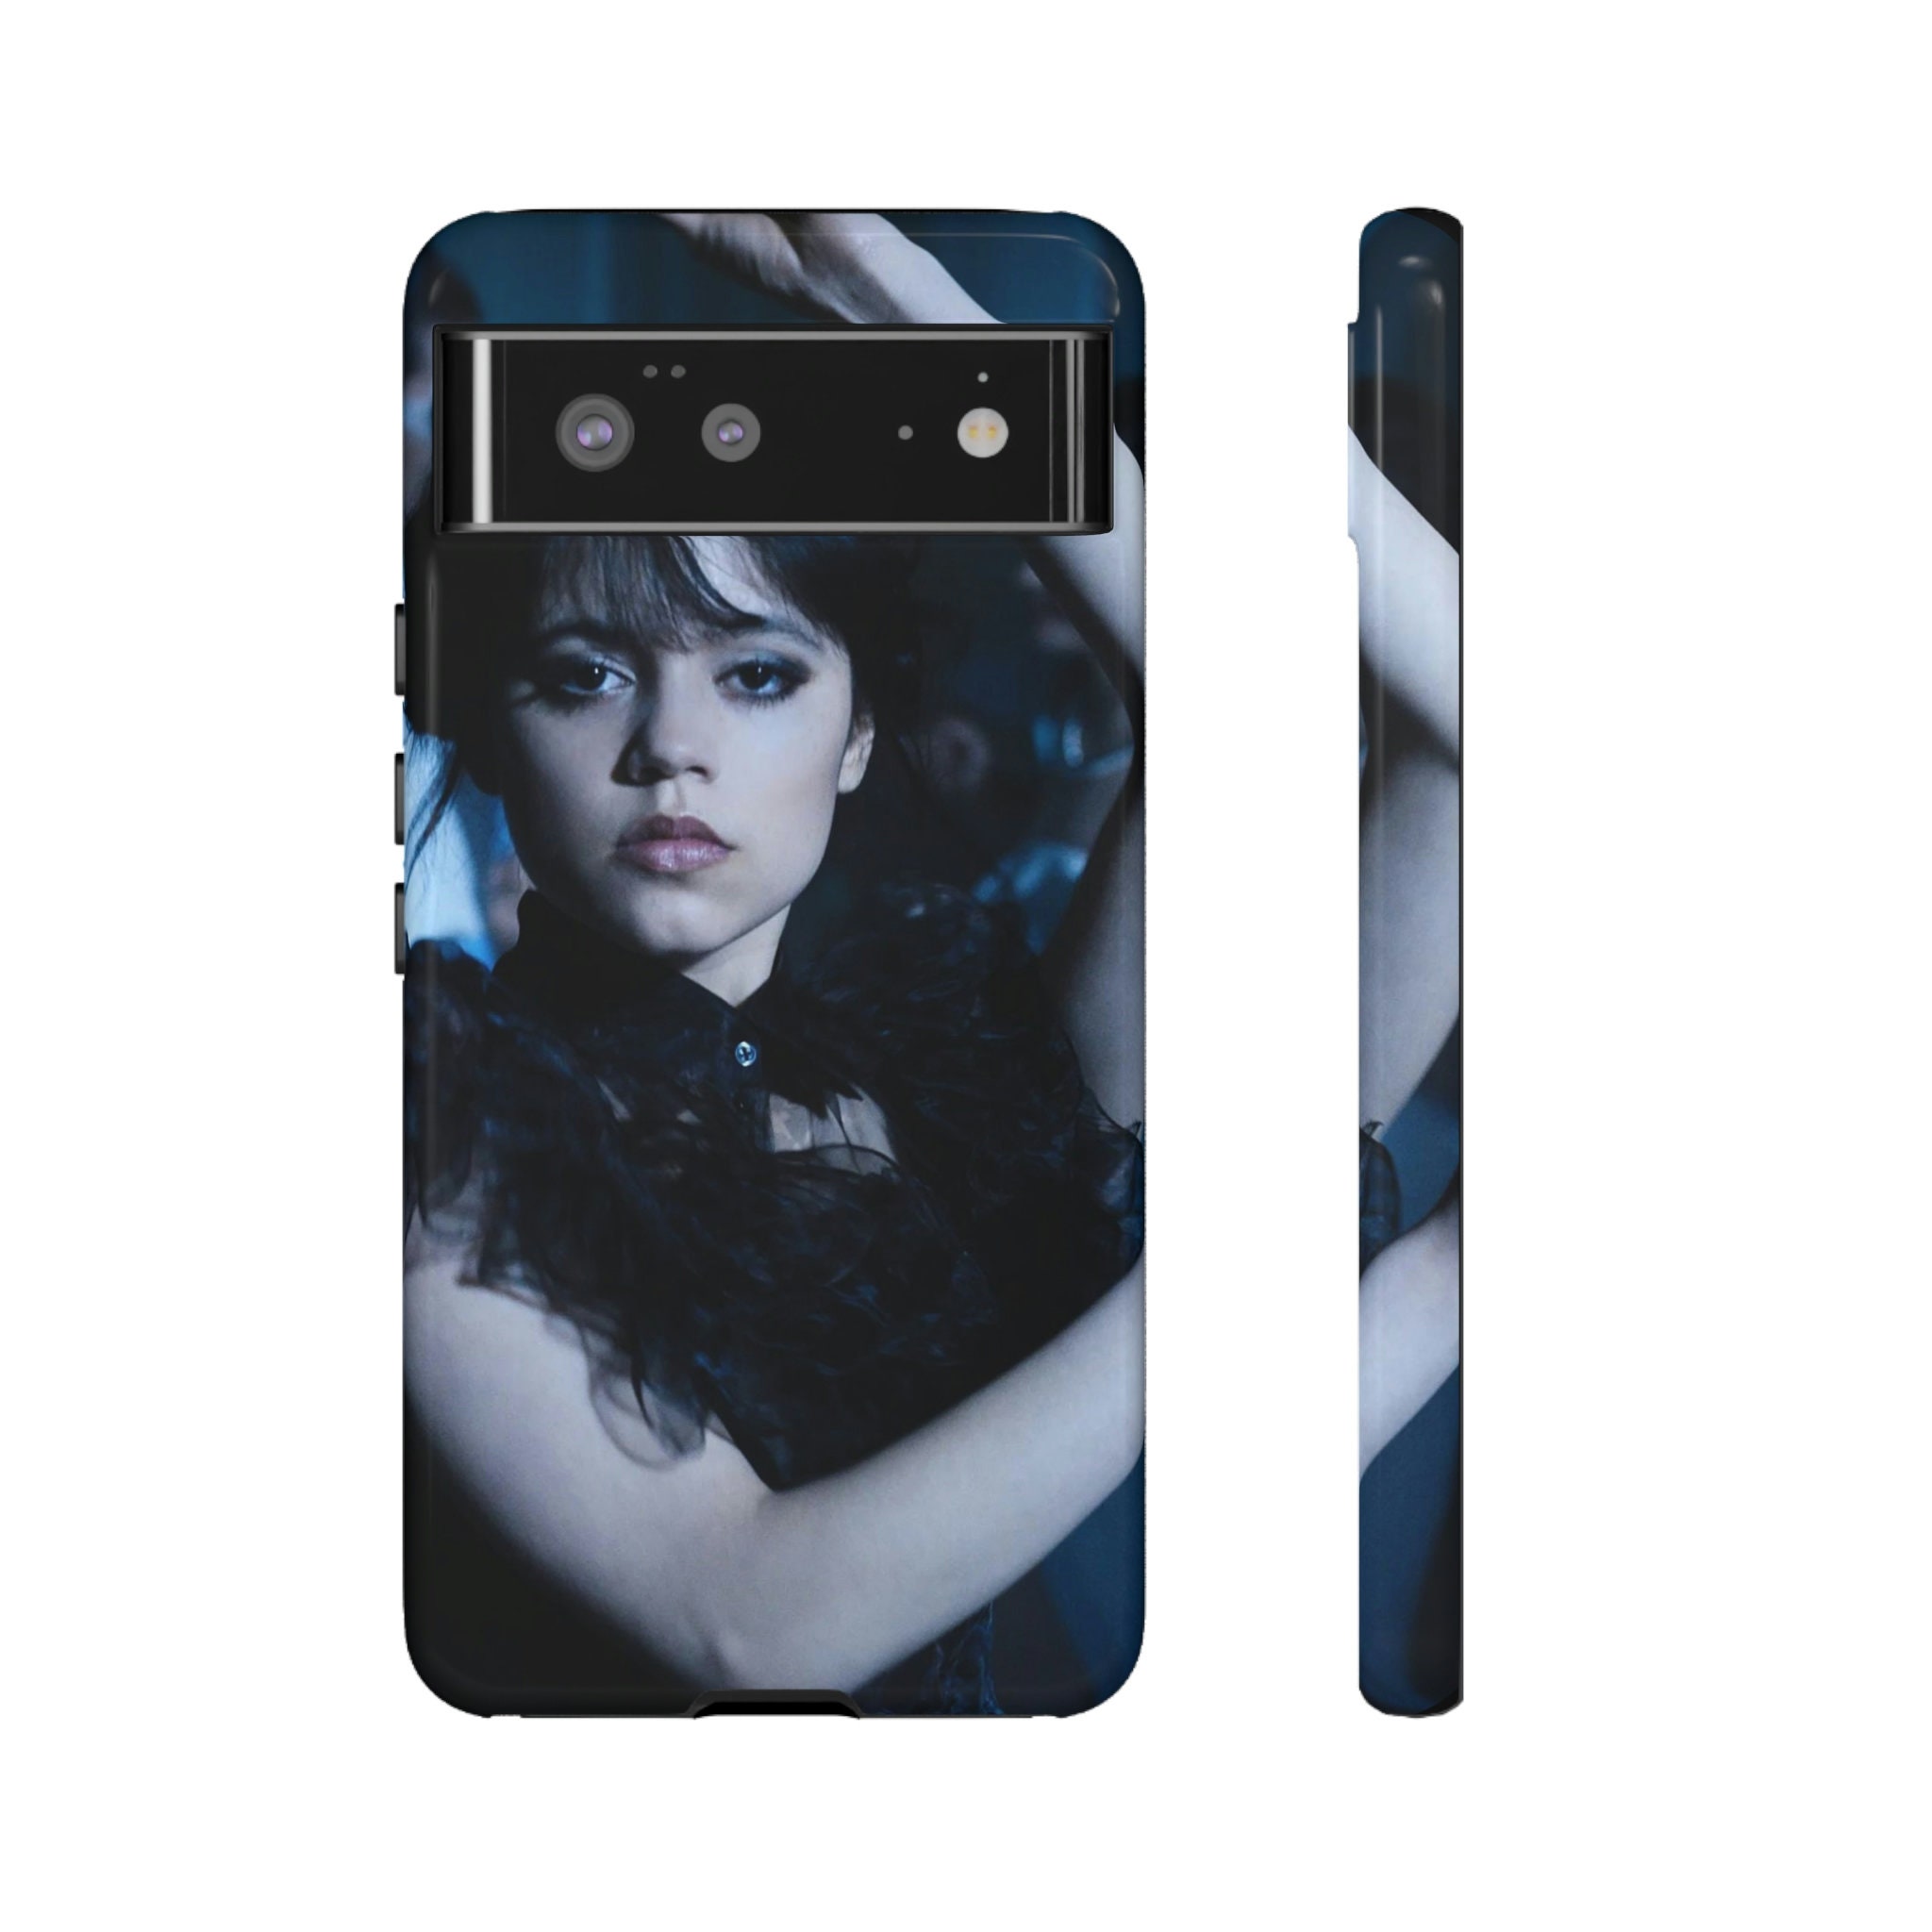 Wednesday Dance phone case from Tough Cases